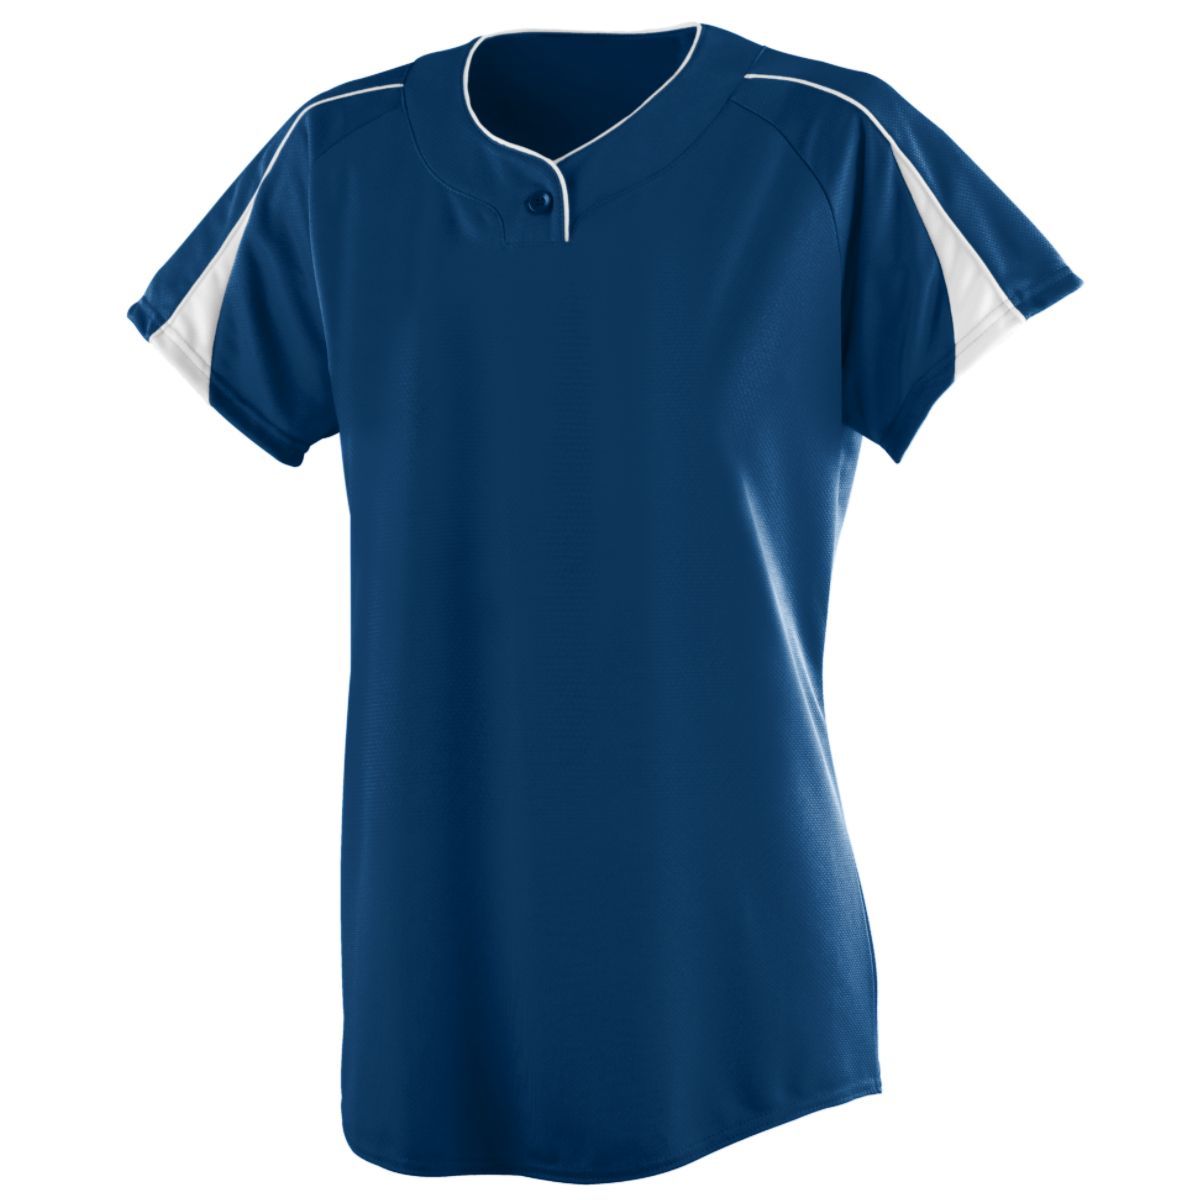 Augusta Sportswear Ladies Diamond Jersey in Navy/White  -Part of the Ladies, Ladies-Jersey, Augusta-Products, Softball, Shirts product lines at KanaleyCreations.com